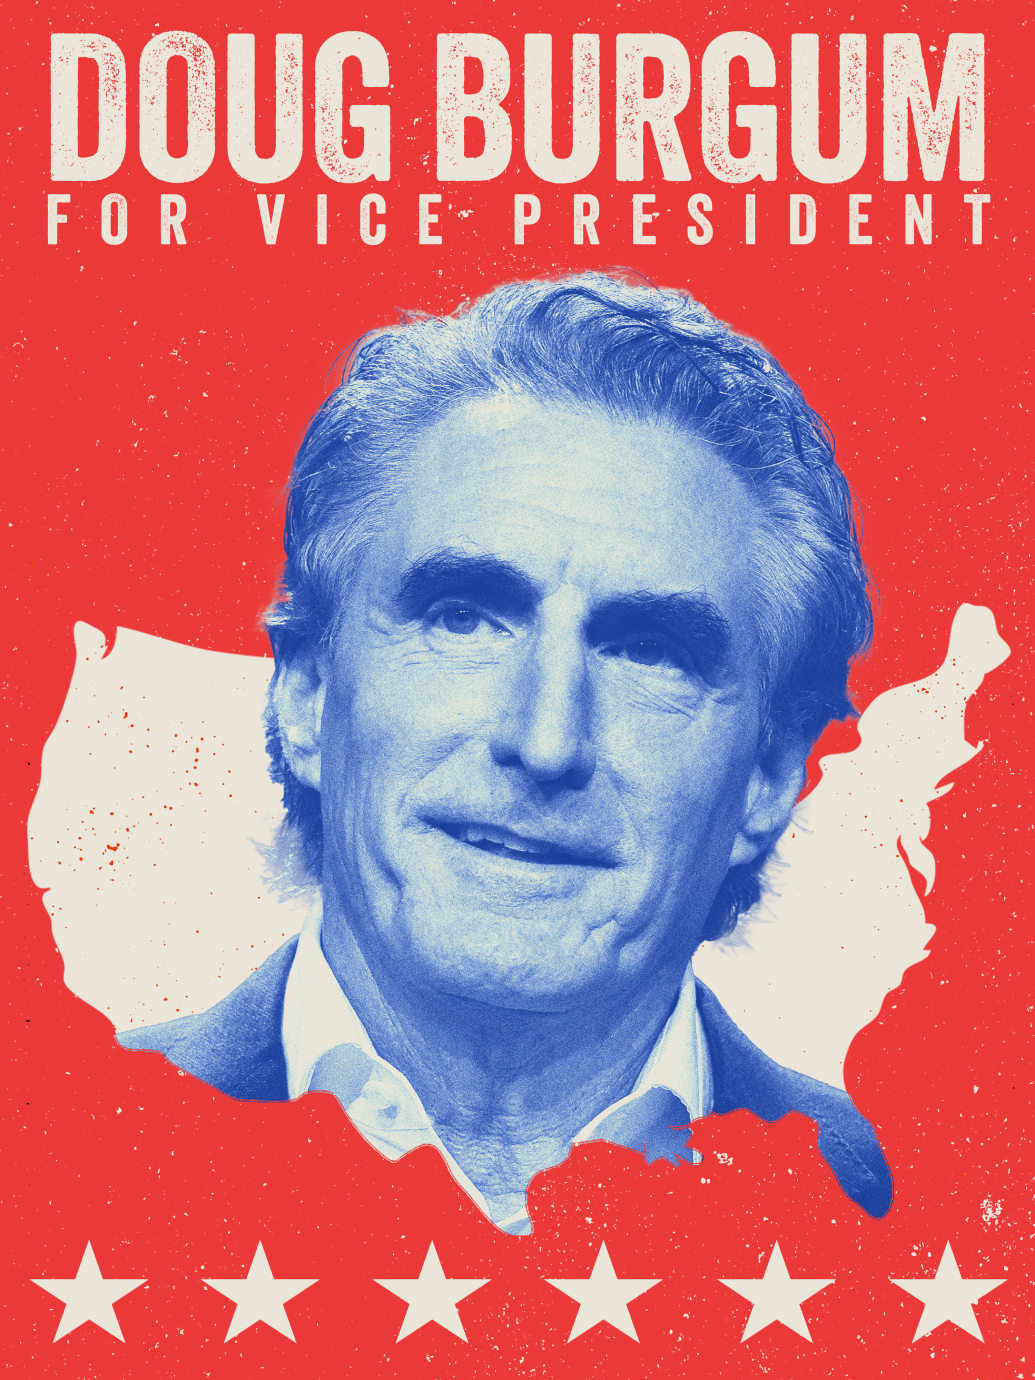 Vice Presidential campaign poster featuring Doug Burgum